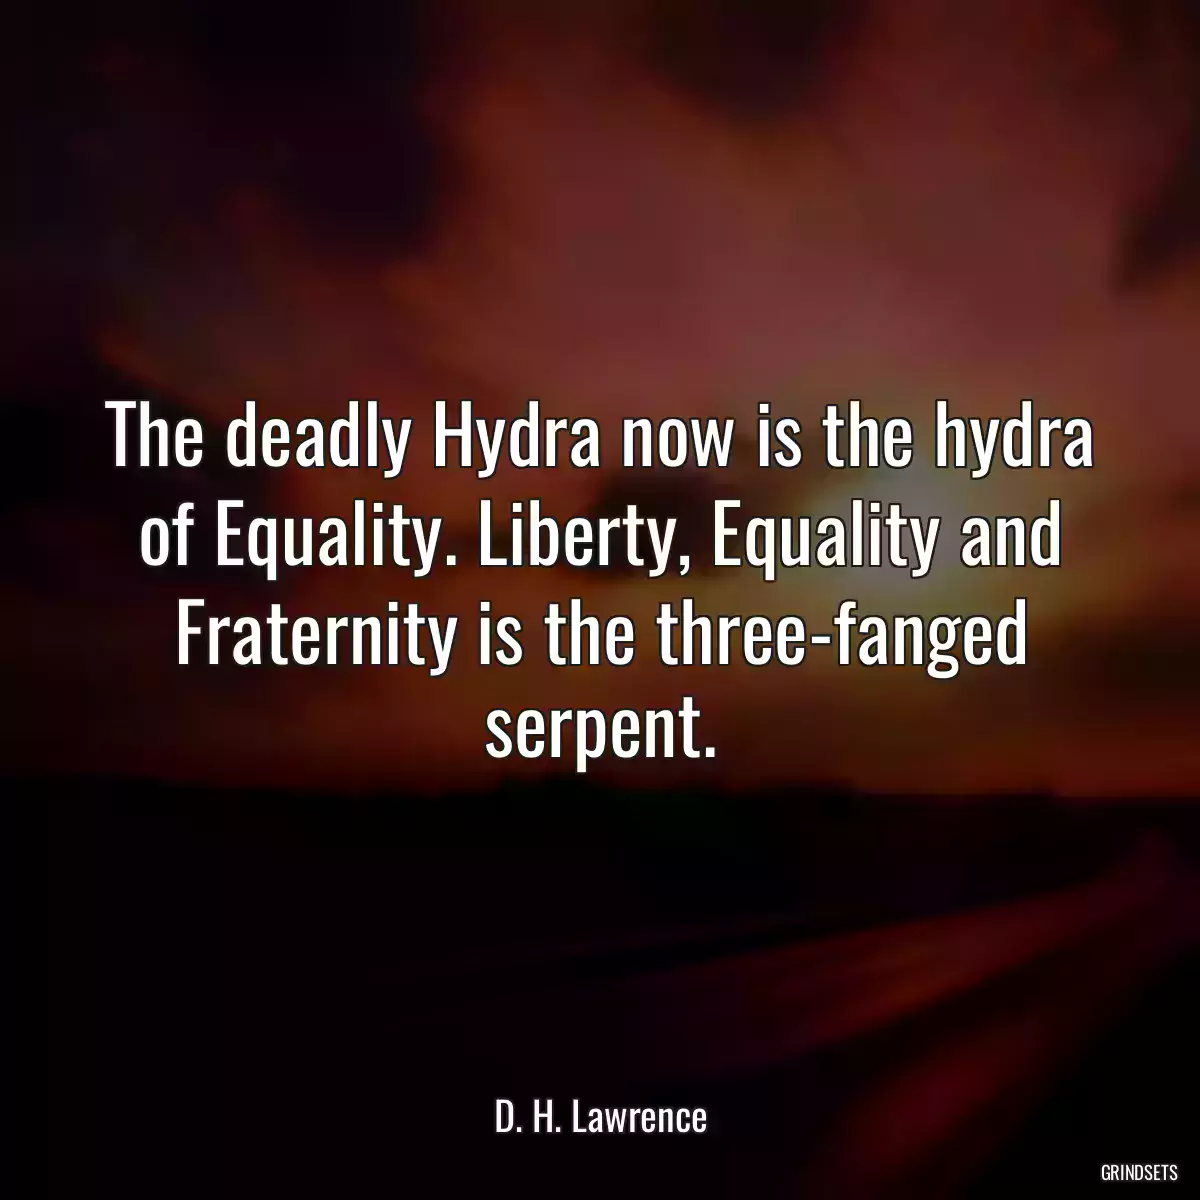 The deadly Hydra now is the hydra of Equality. Liberty, Equality and Fraternity is the three-fanged serpent.